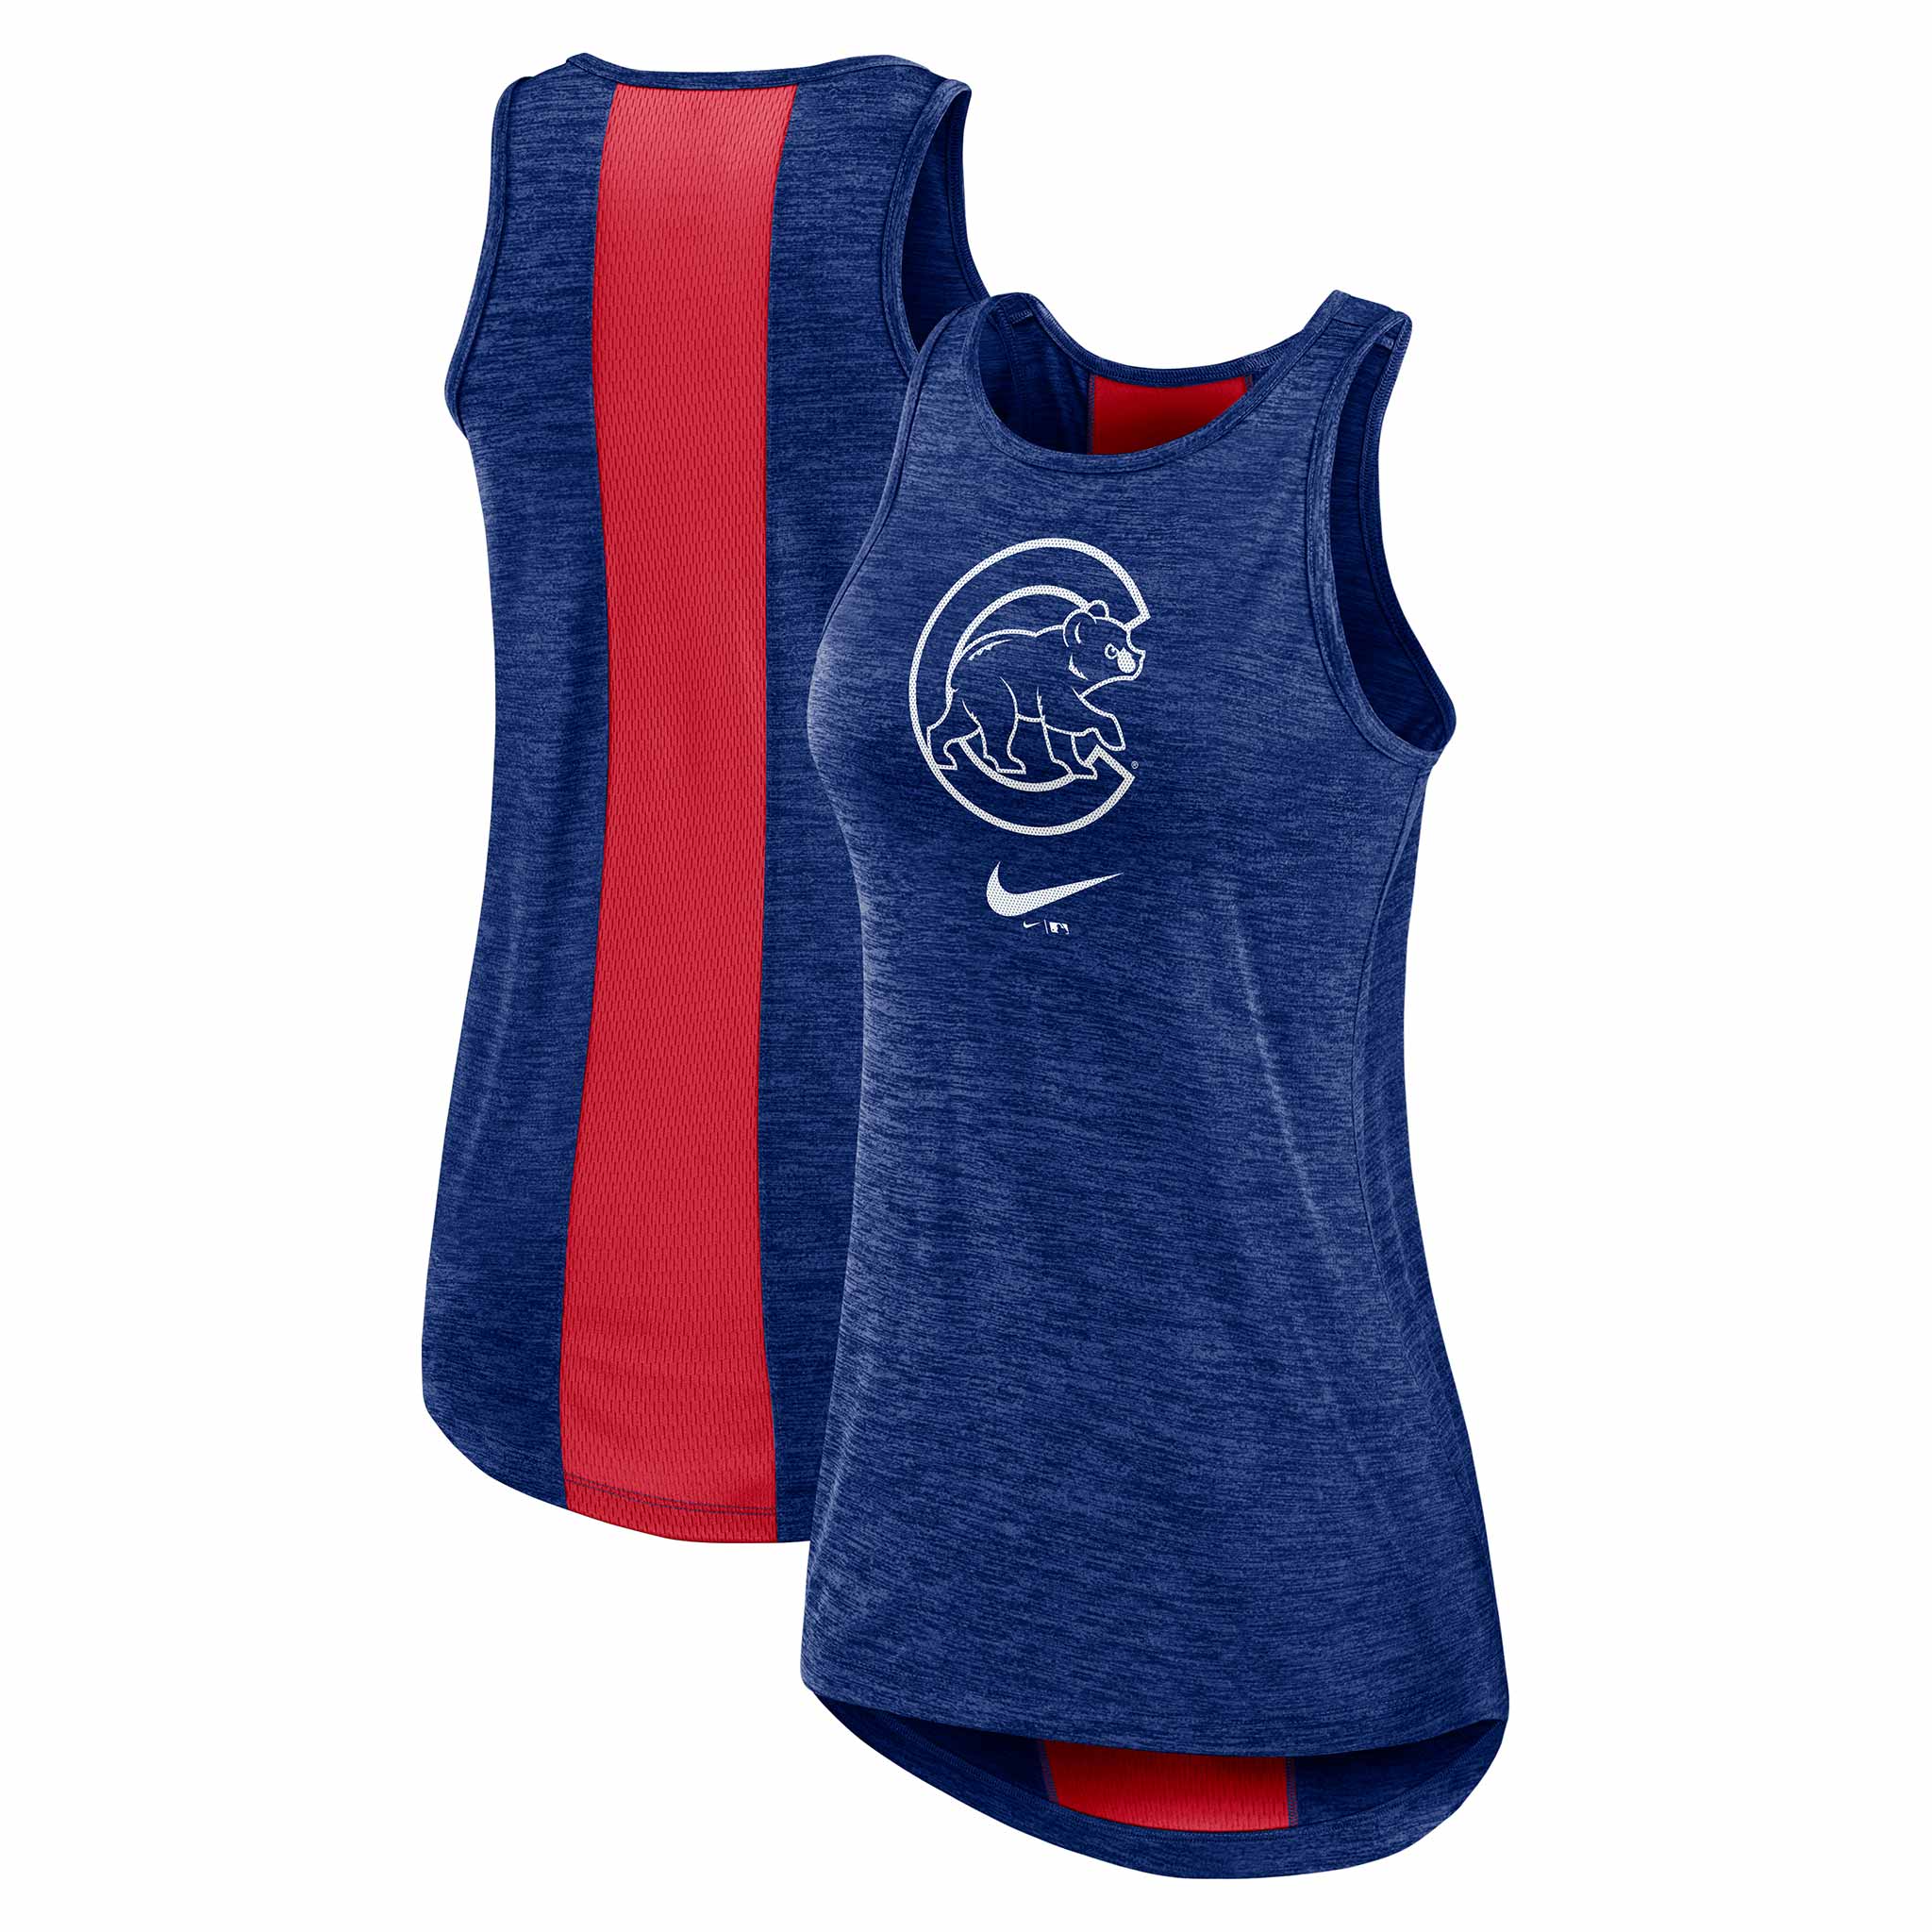 Nike Dri-Fit Right Mix (MLB Chicago Cubs) Women's High-Neck Tank Top